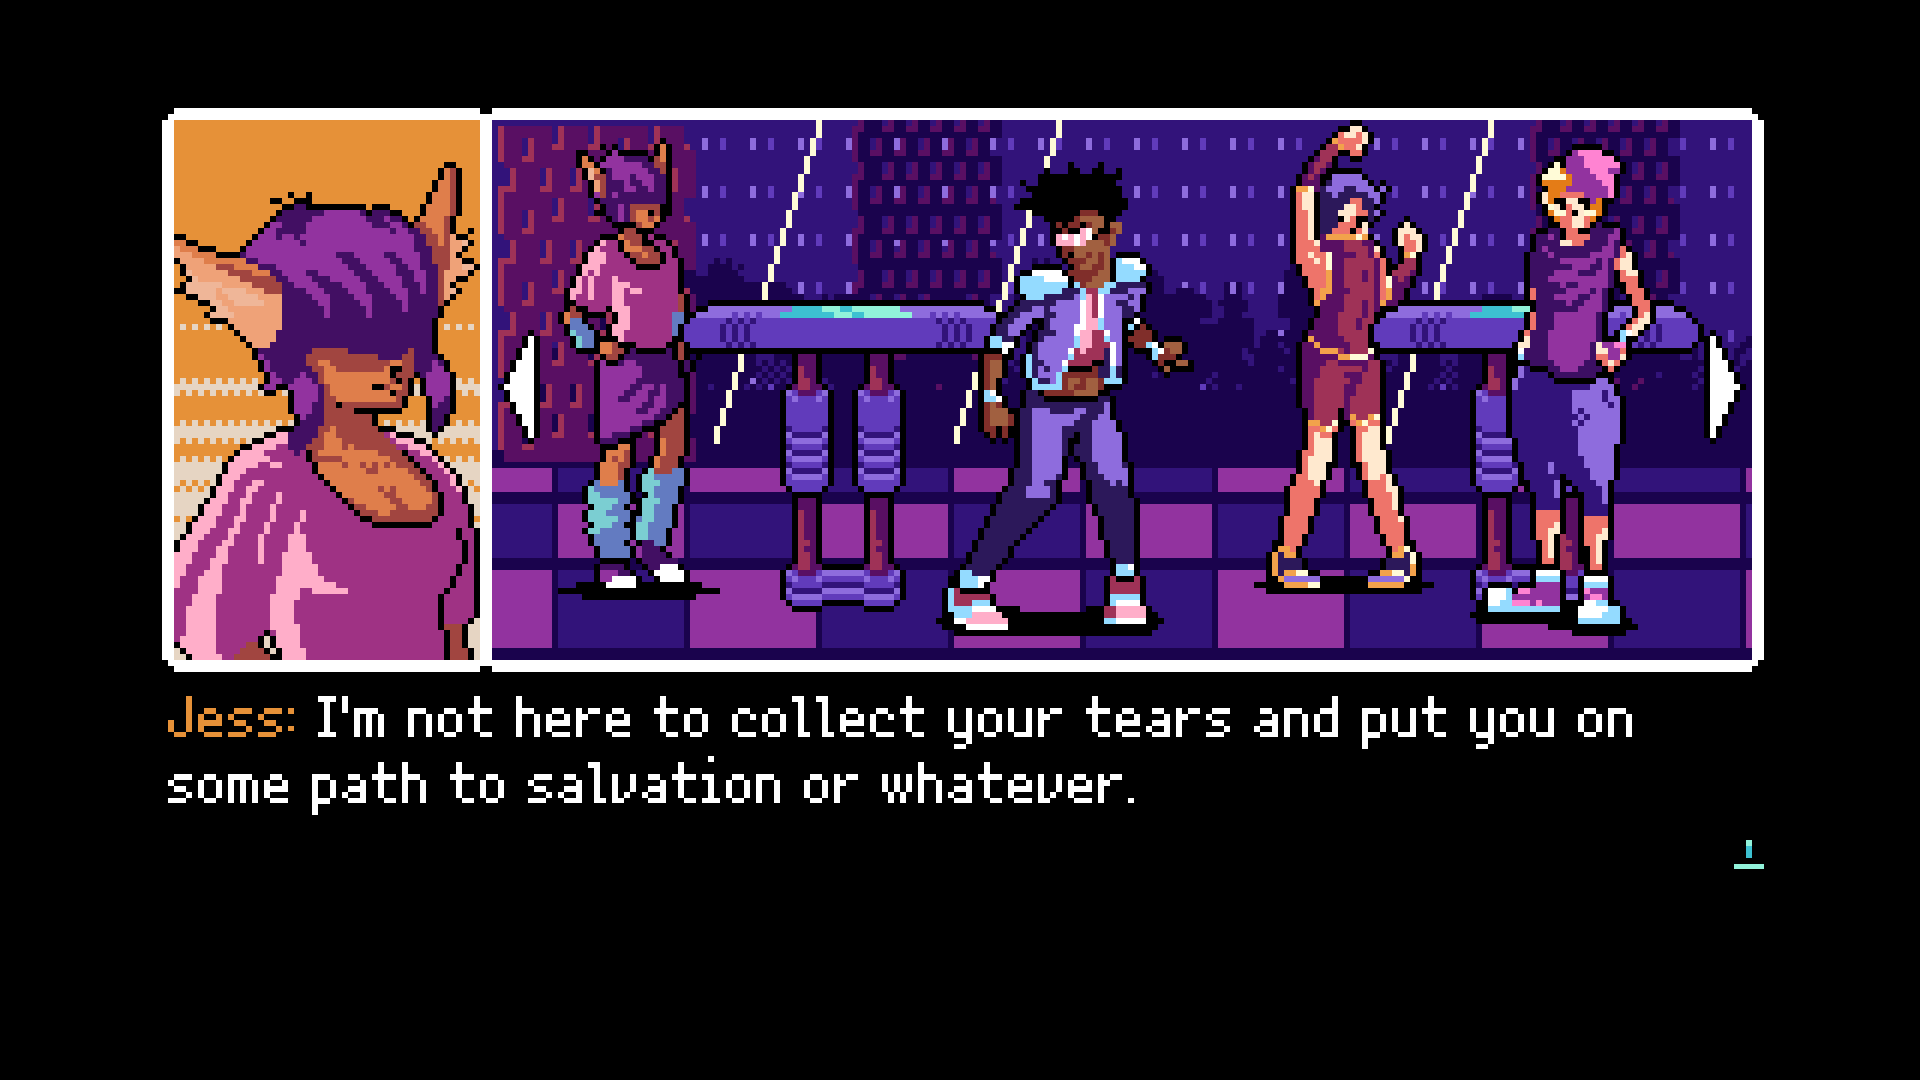 2064_ Read Only Memories_20170114135910